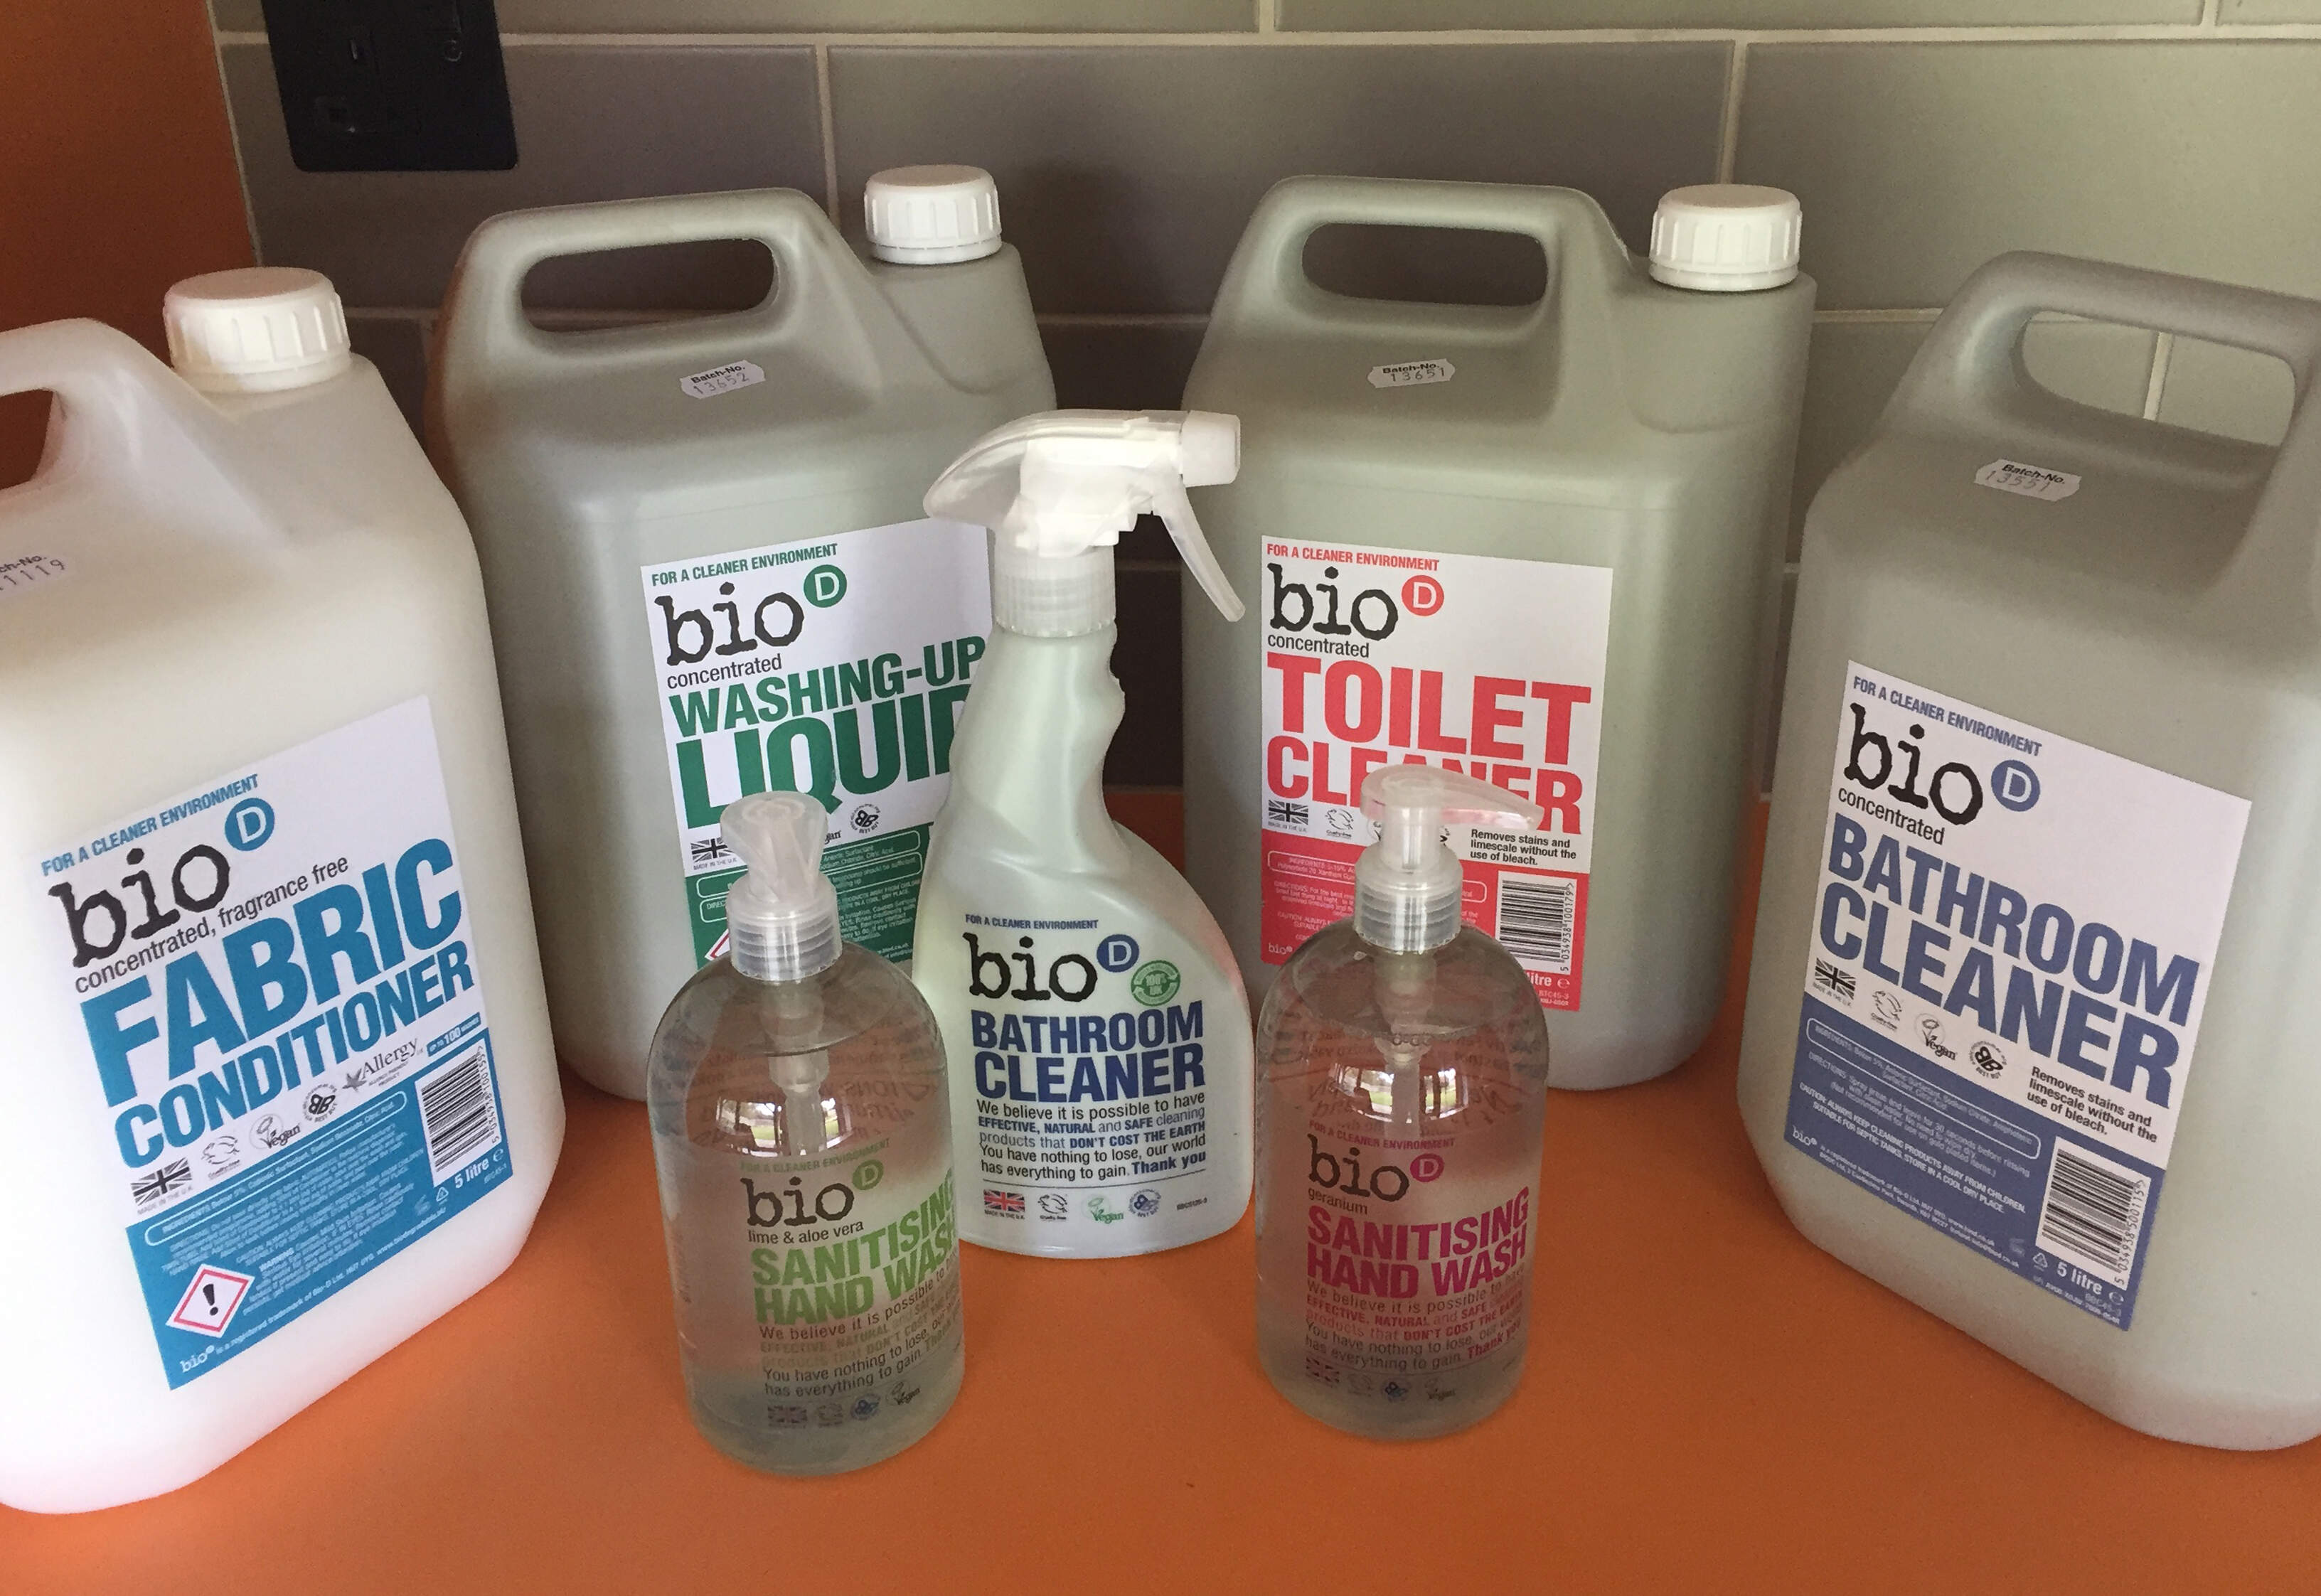 Only Bio ecologically sustainable cleaning products used throughout the property.